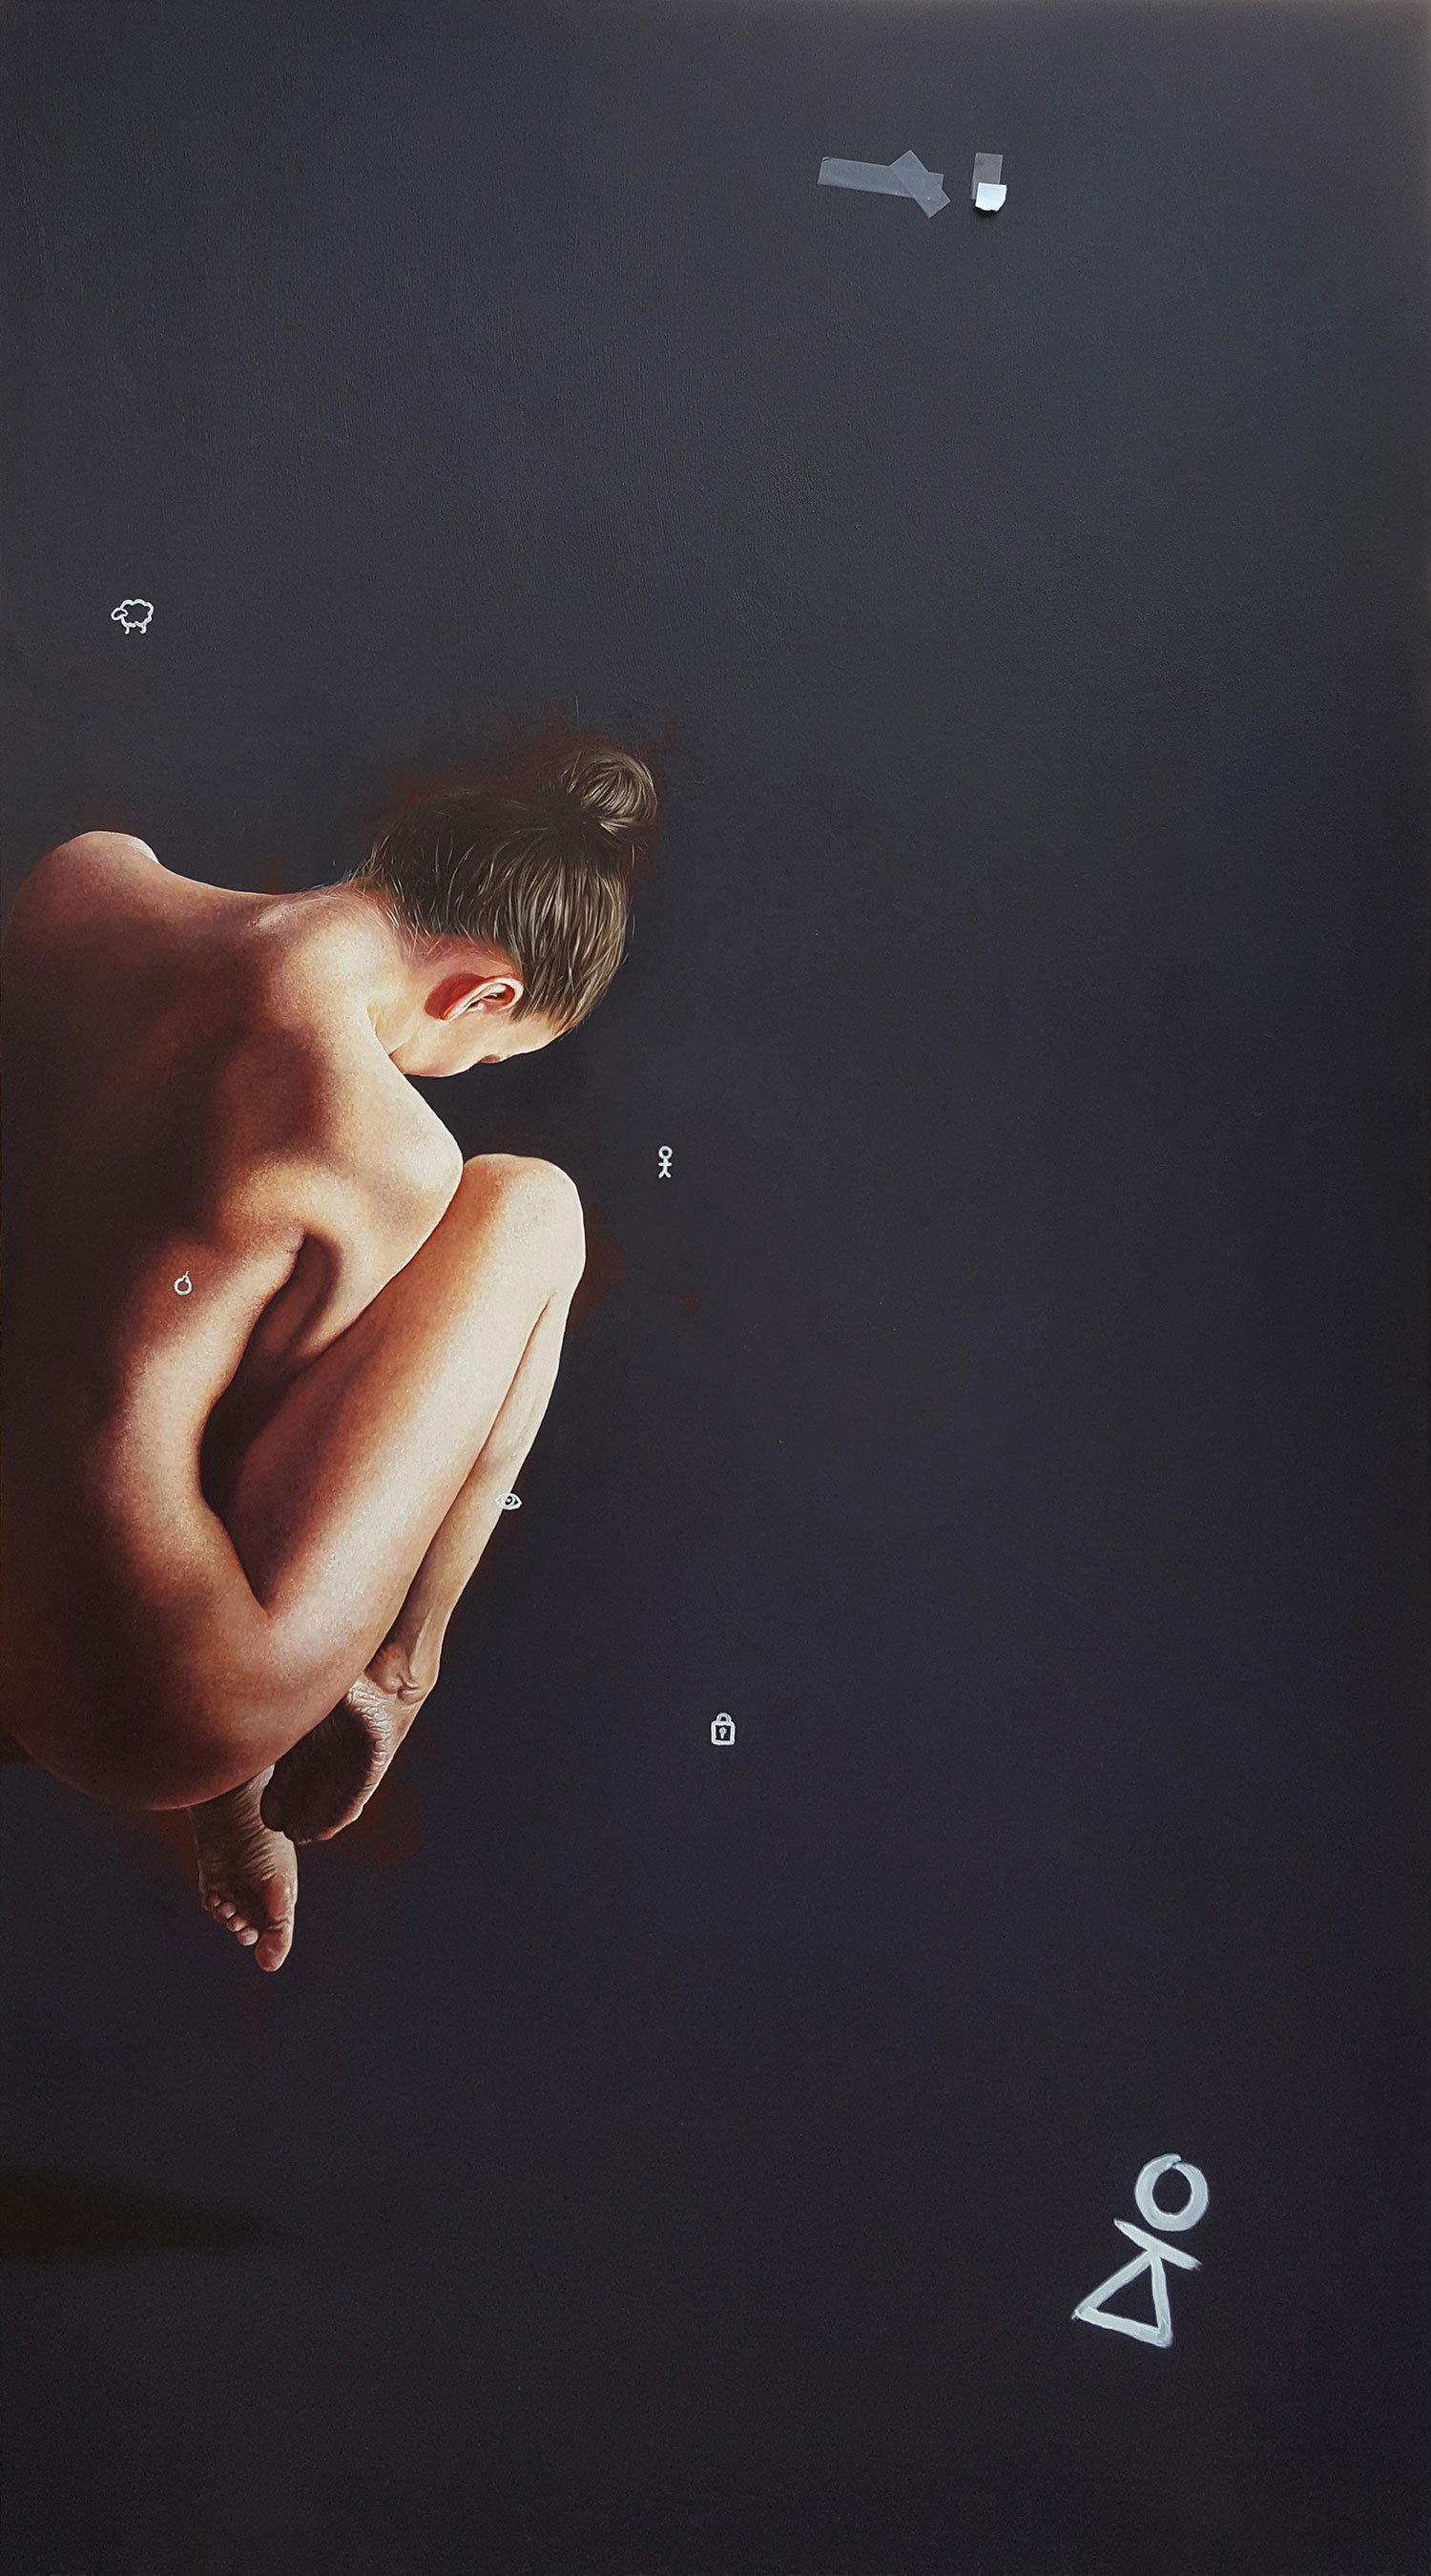 Why do I not know that my thoughts representing my fears | Oil on canvas | 100 x 180 cm